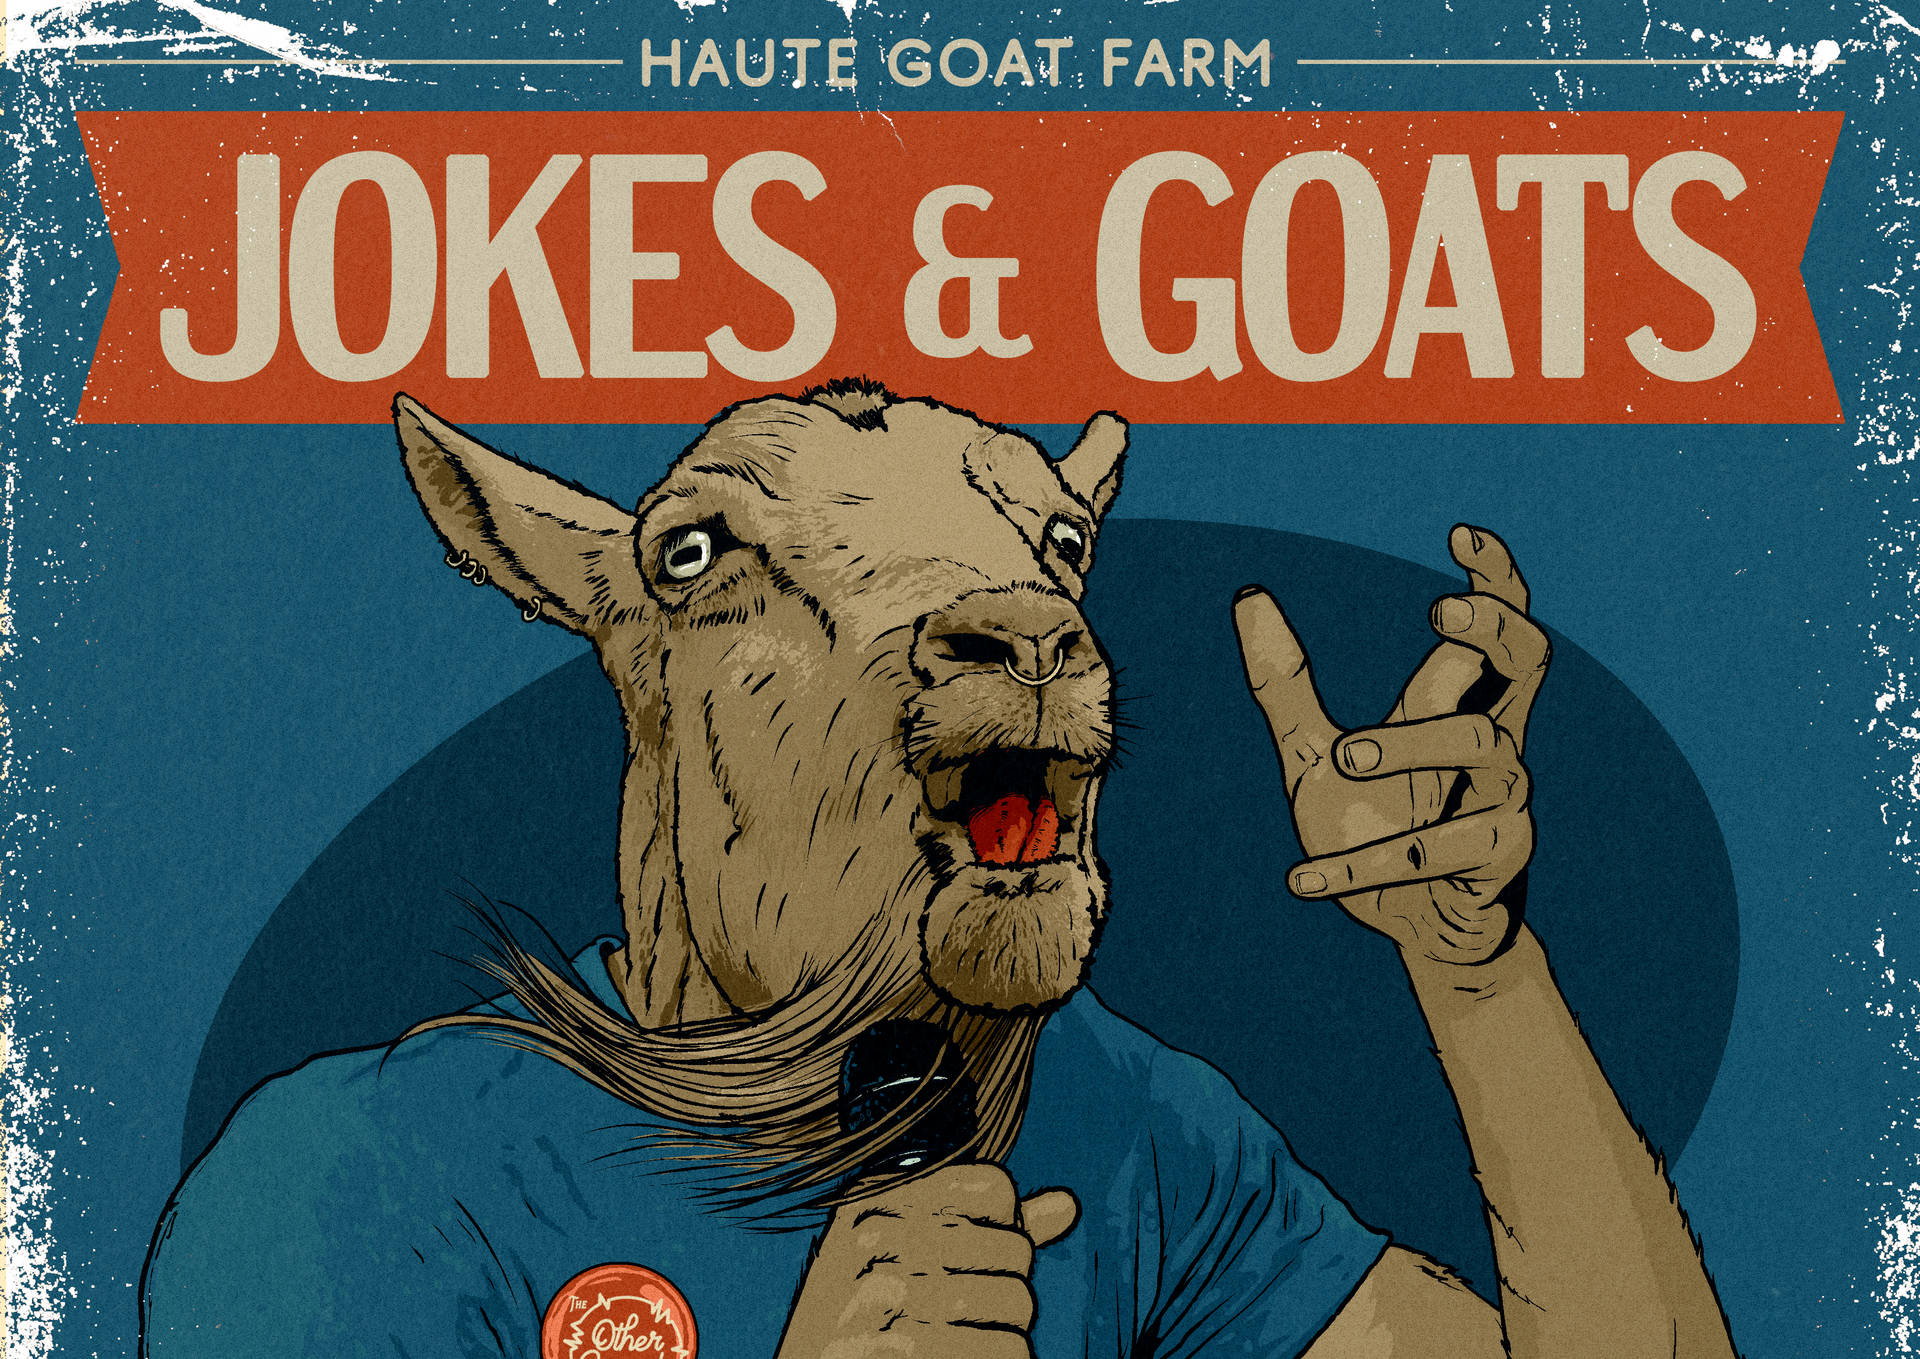 Goats & Jokes is coming to Haute Goat Farms!